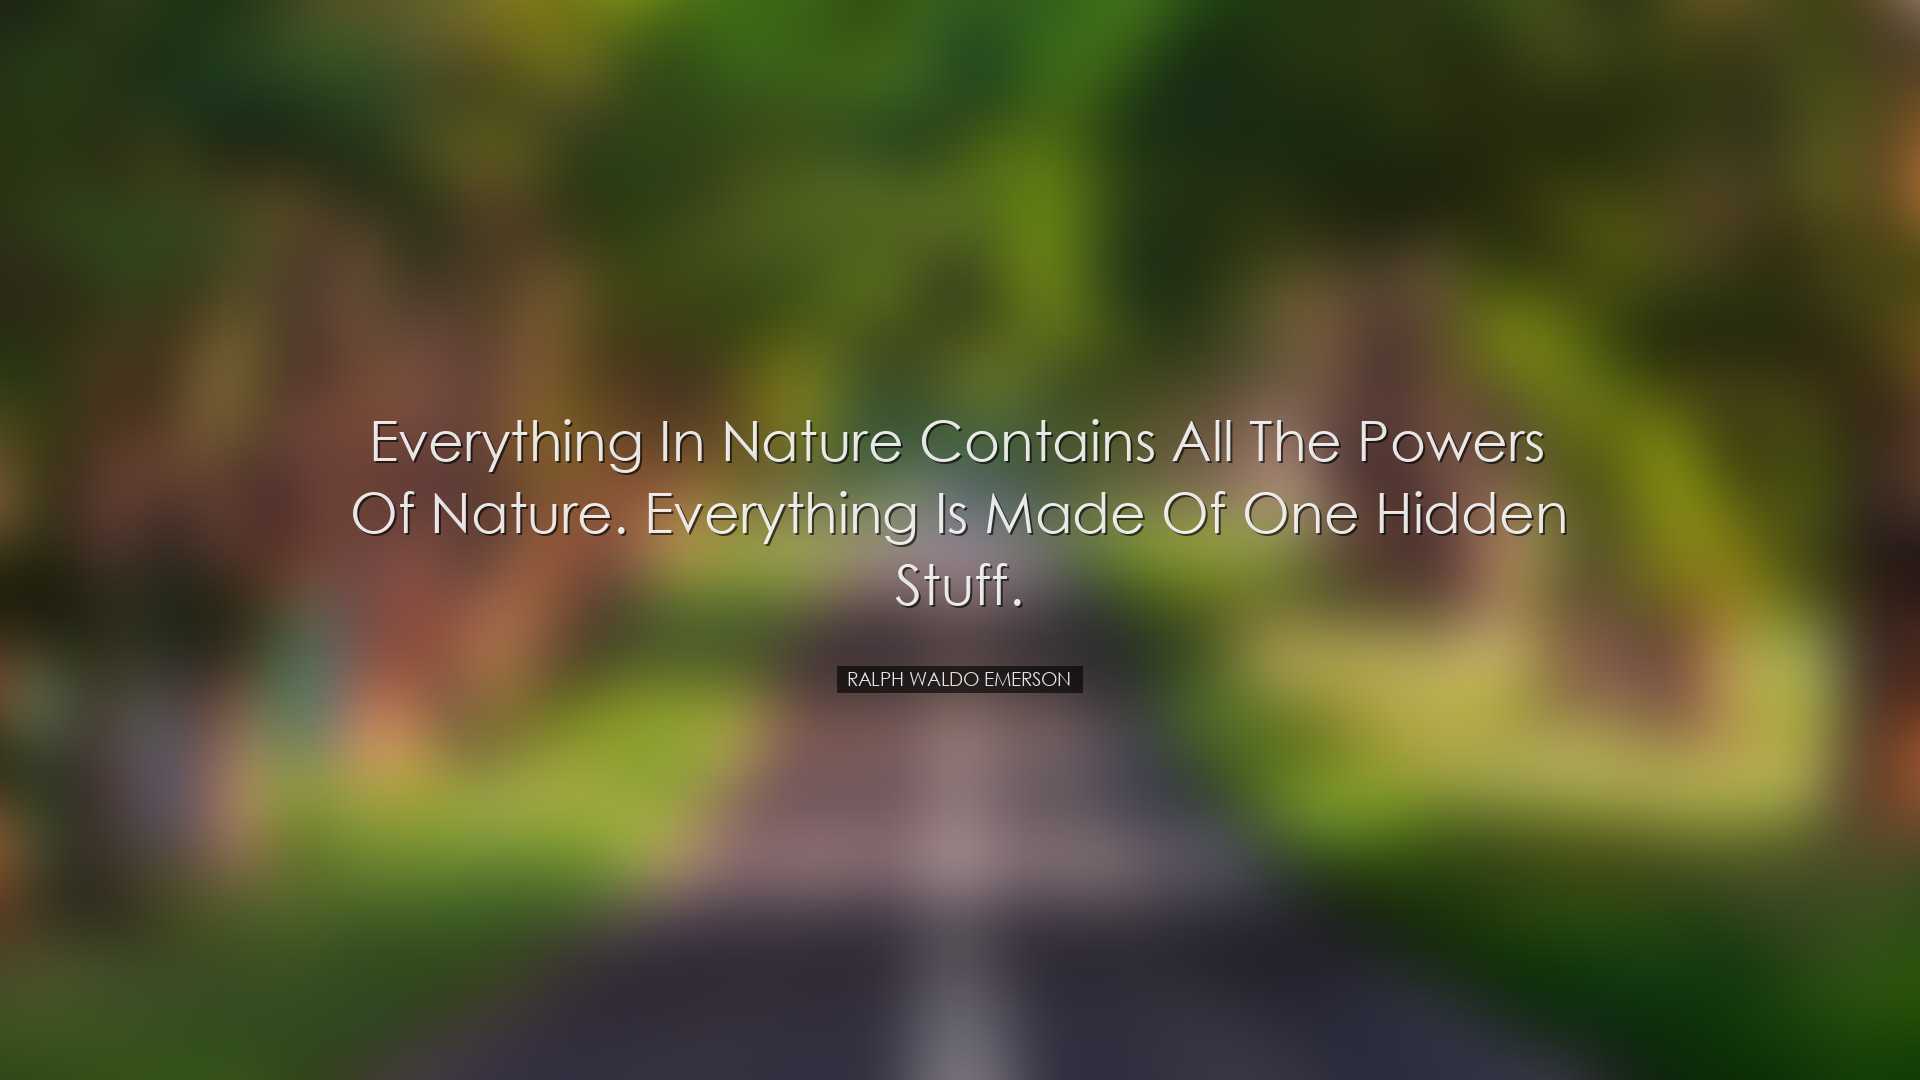 Everything in Nature contains all the powers of Nature. Everything